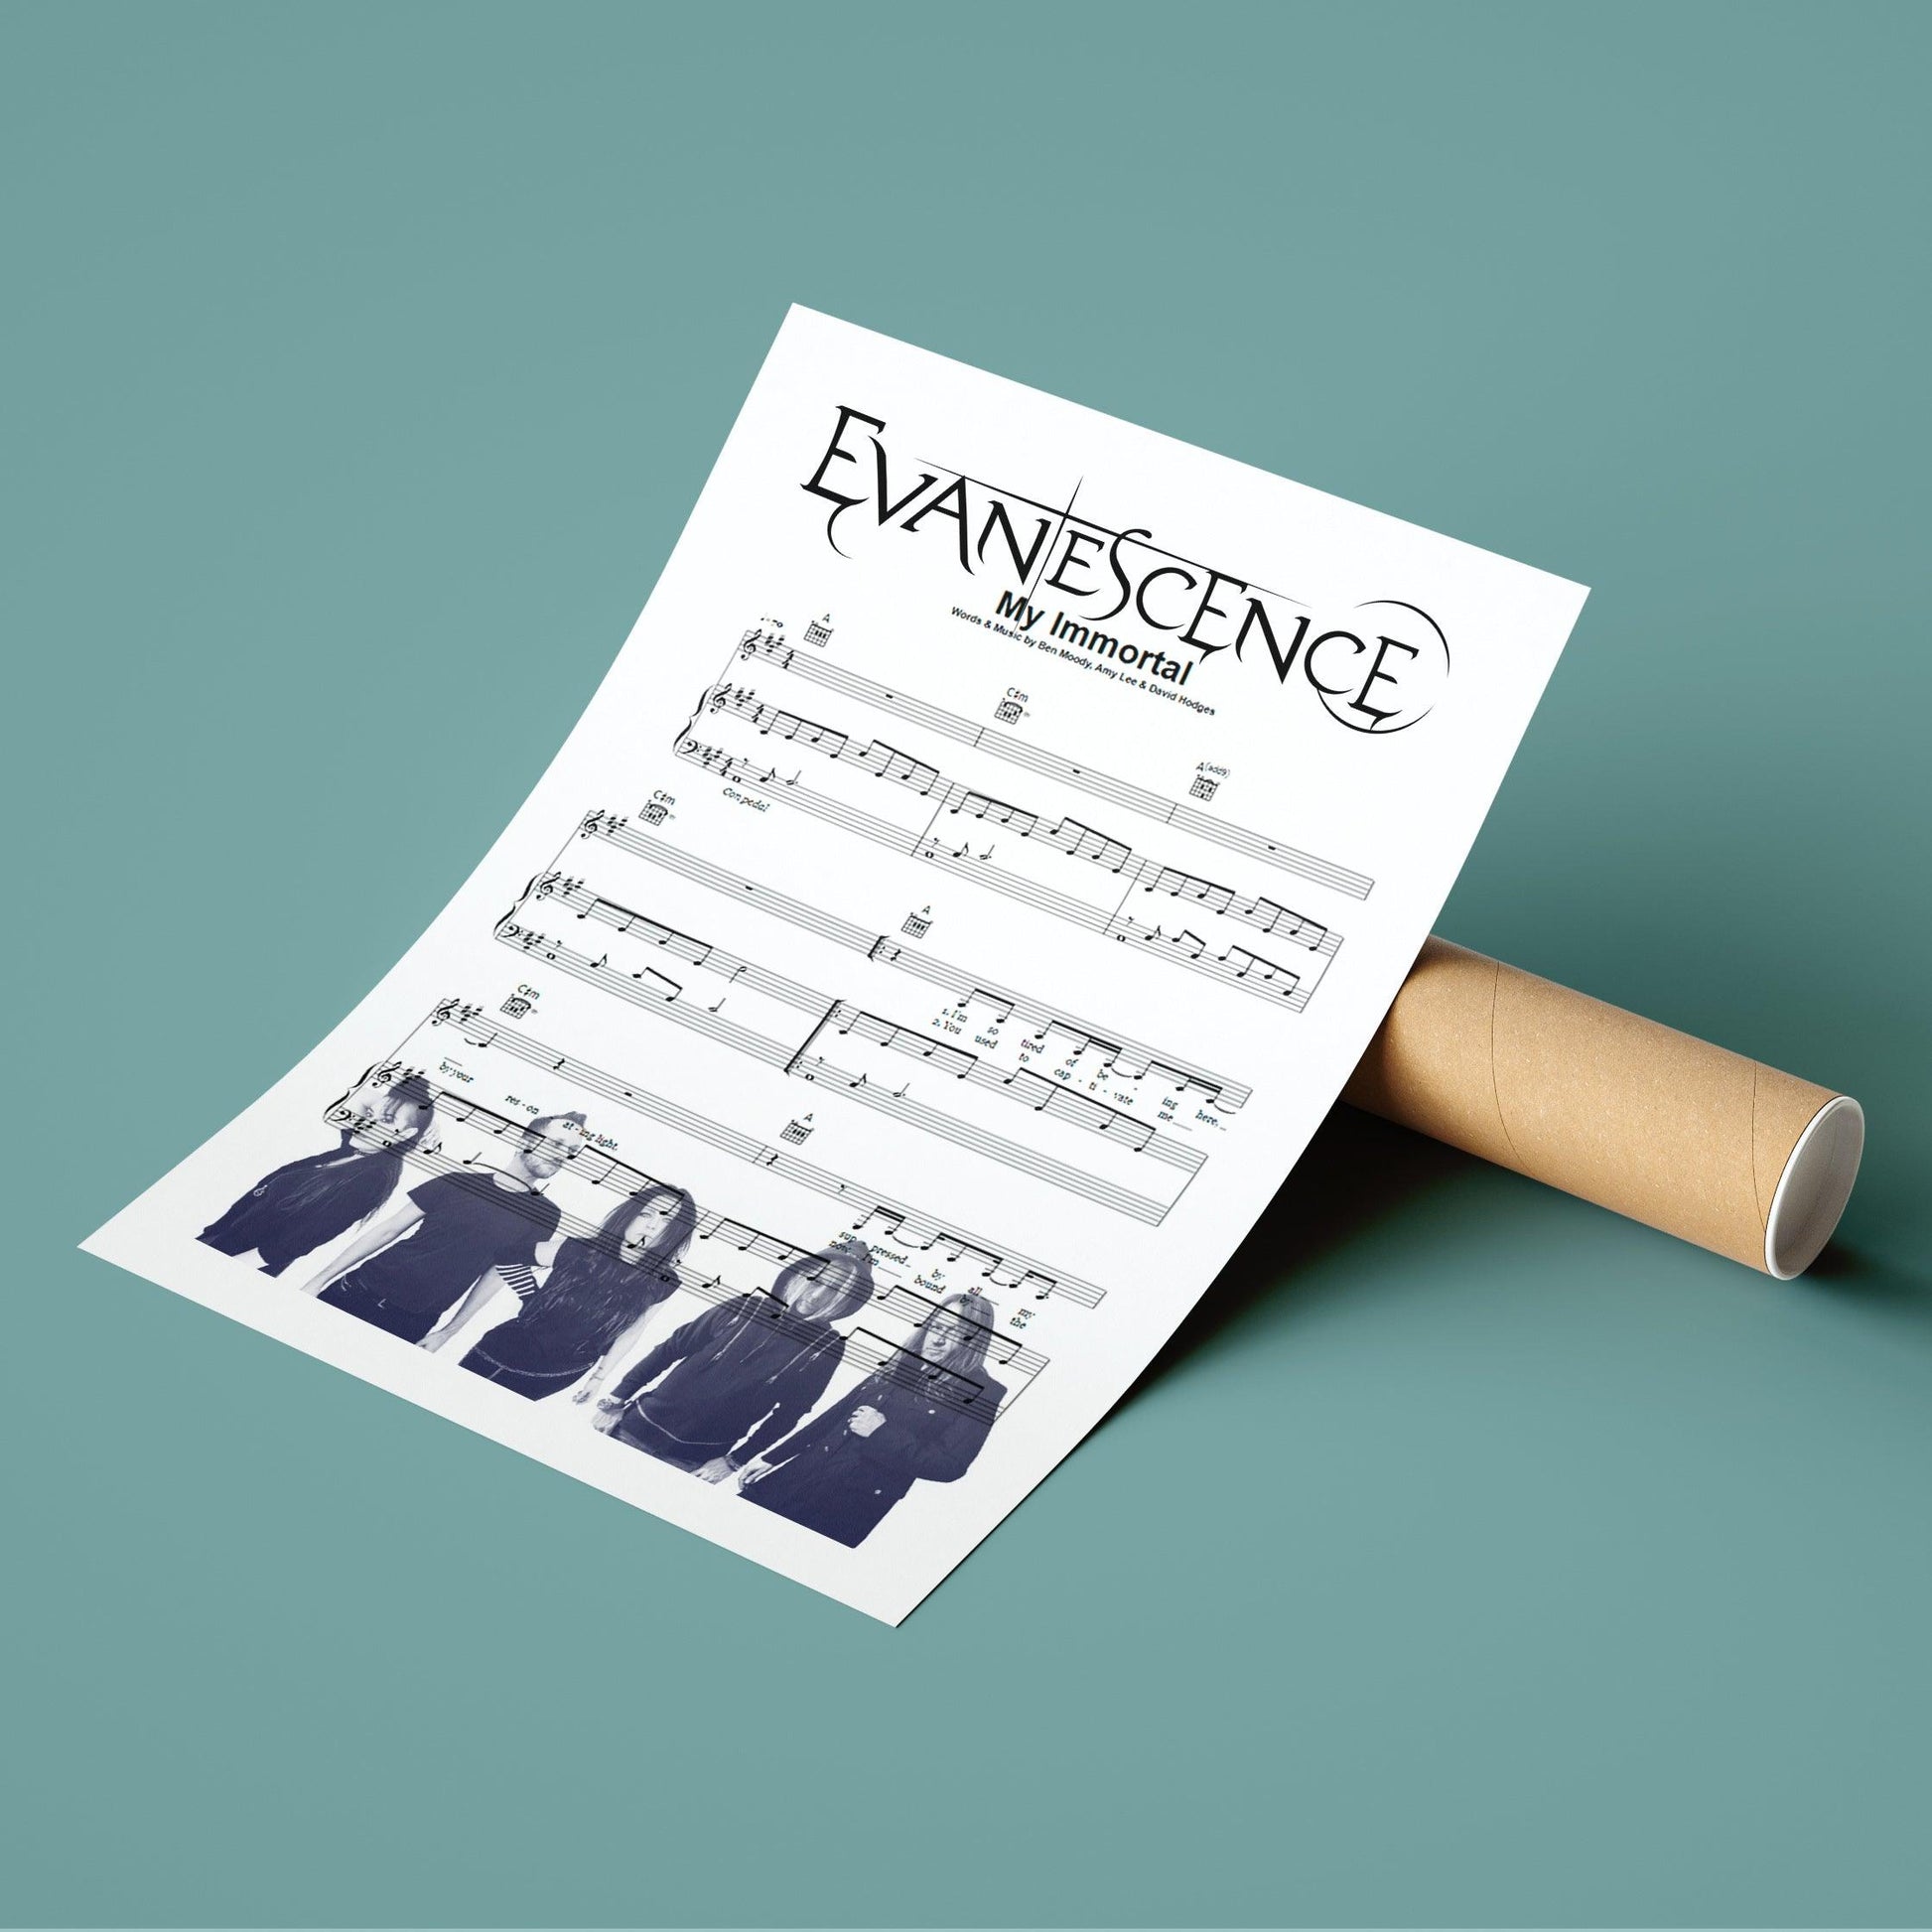 Show your love of music with this Evanescence - My Immortal Poster. This poster is the perfect way to show your support for the band and their music. With a simple design, this poster is perfect for any fan of the band. The high-quality printing makes it ideal to hang in your kitchen or living room. The free fast delivery makes it easy to get your hands on this poster.